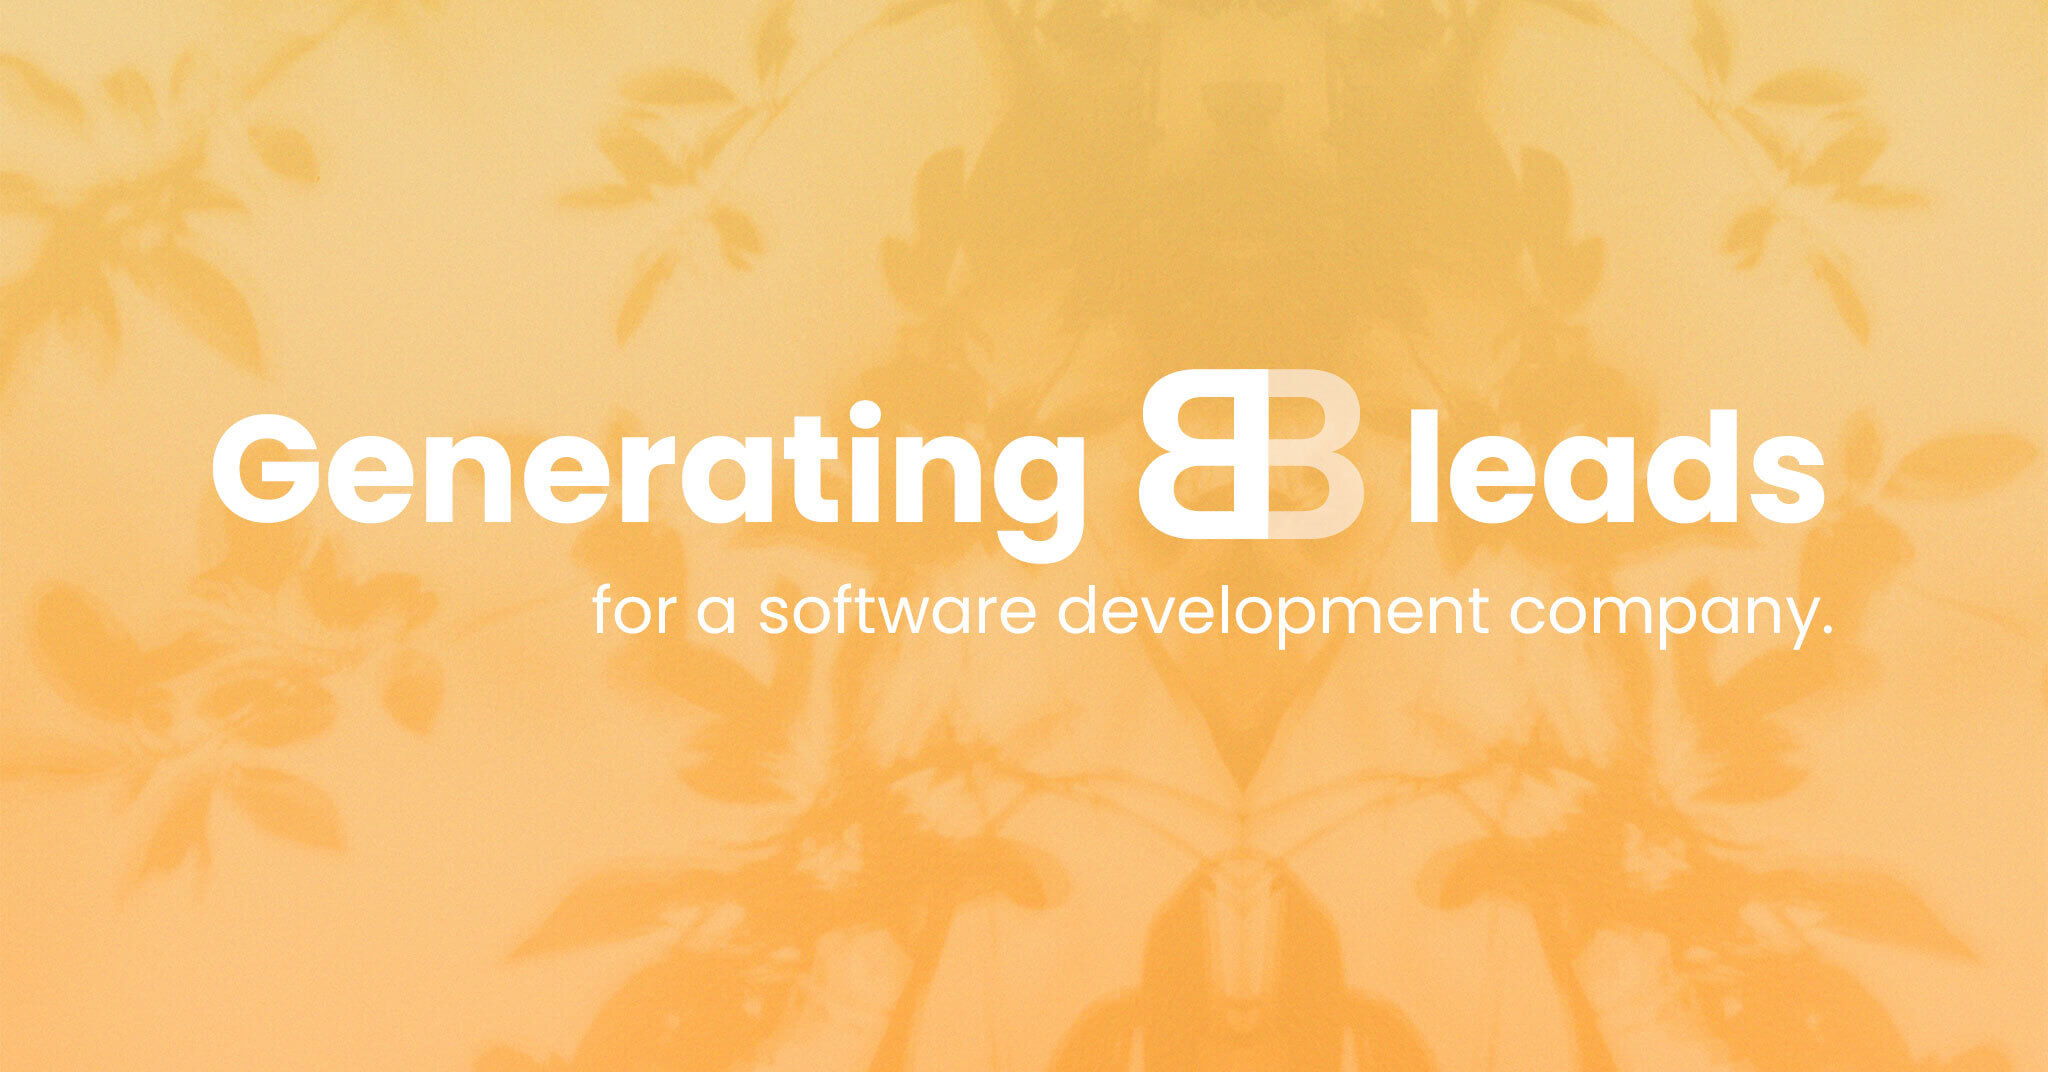 Generating B2B leads for a software development company